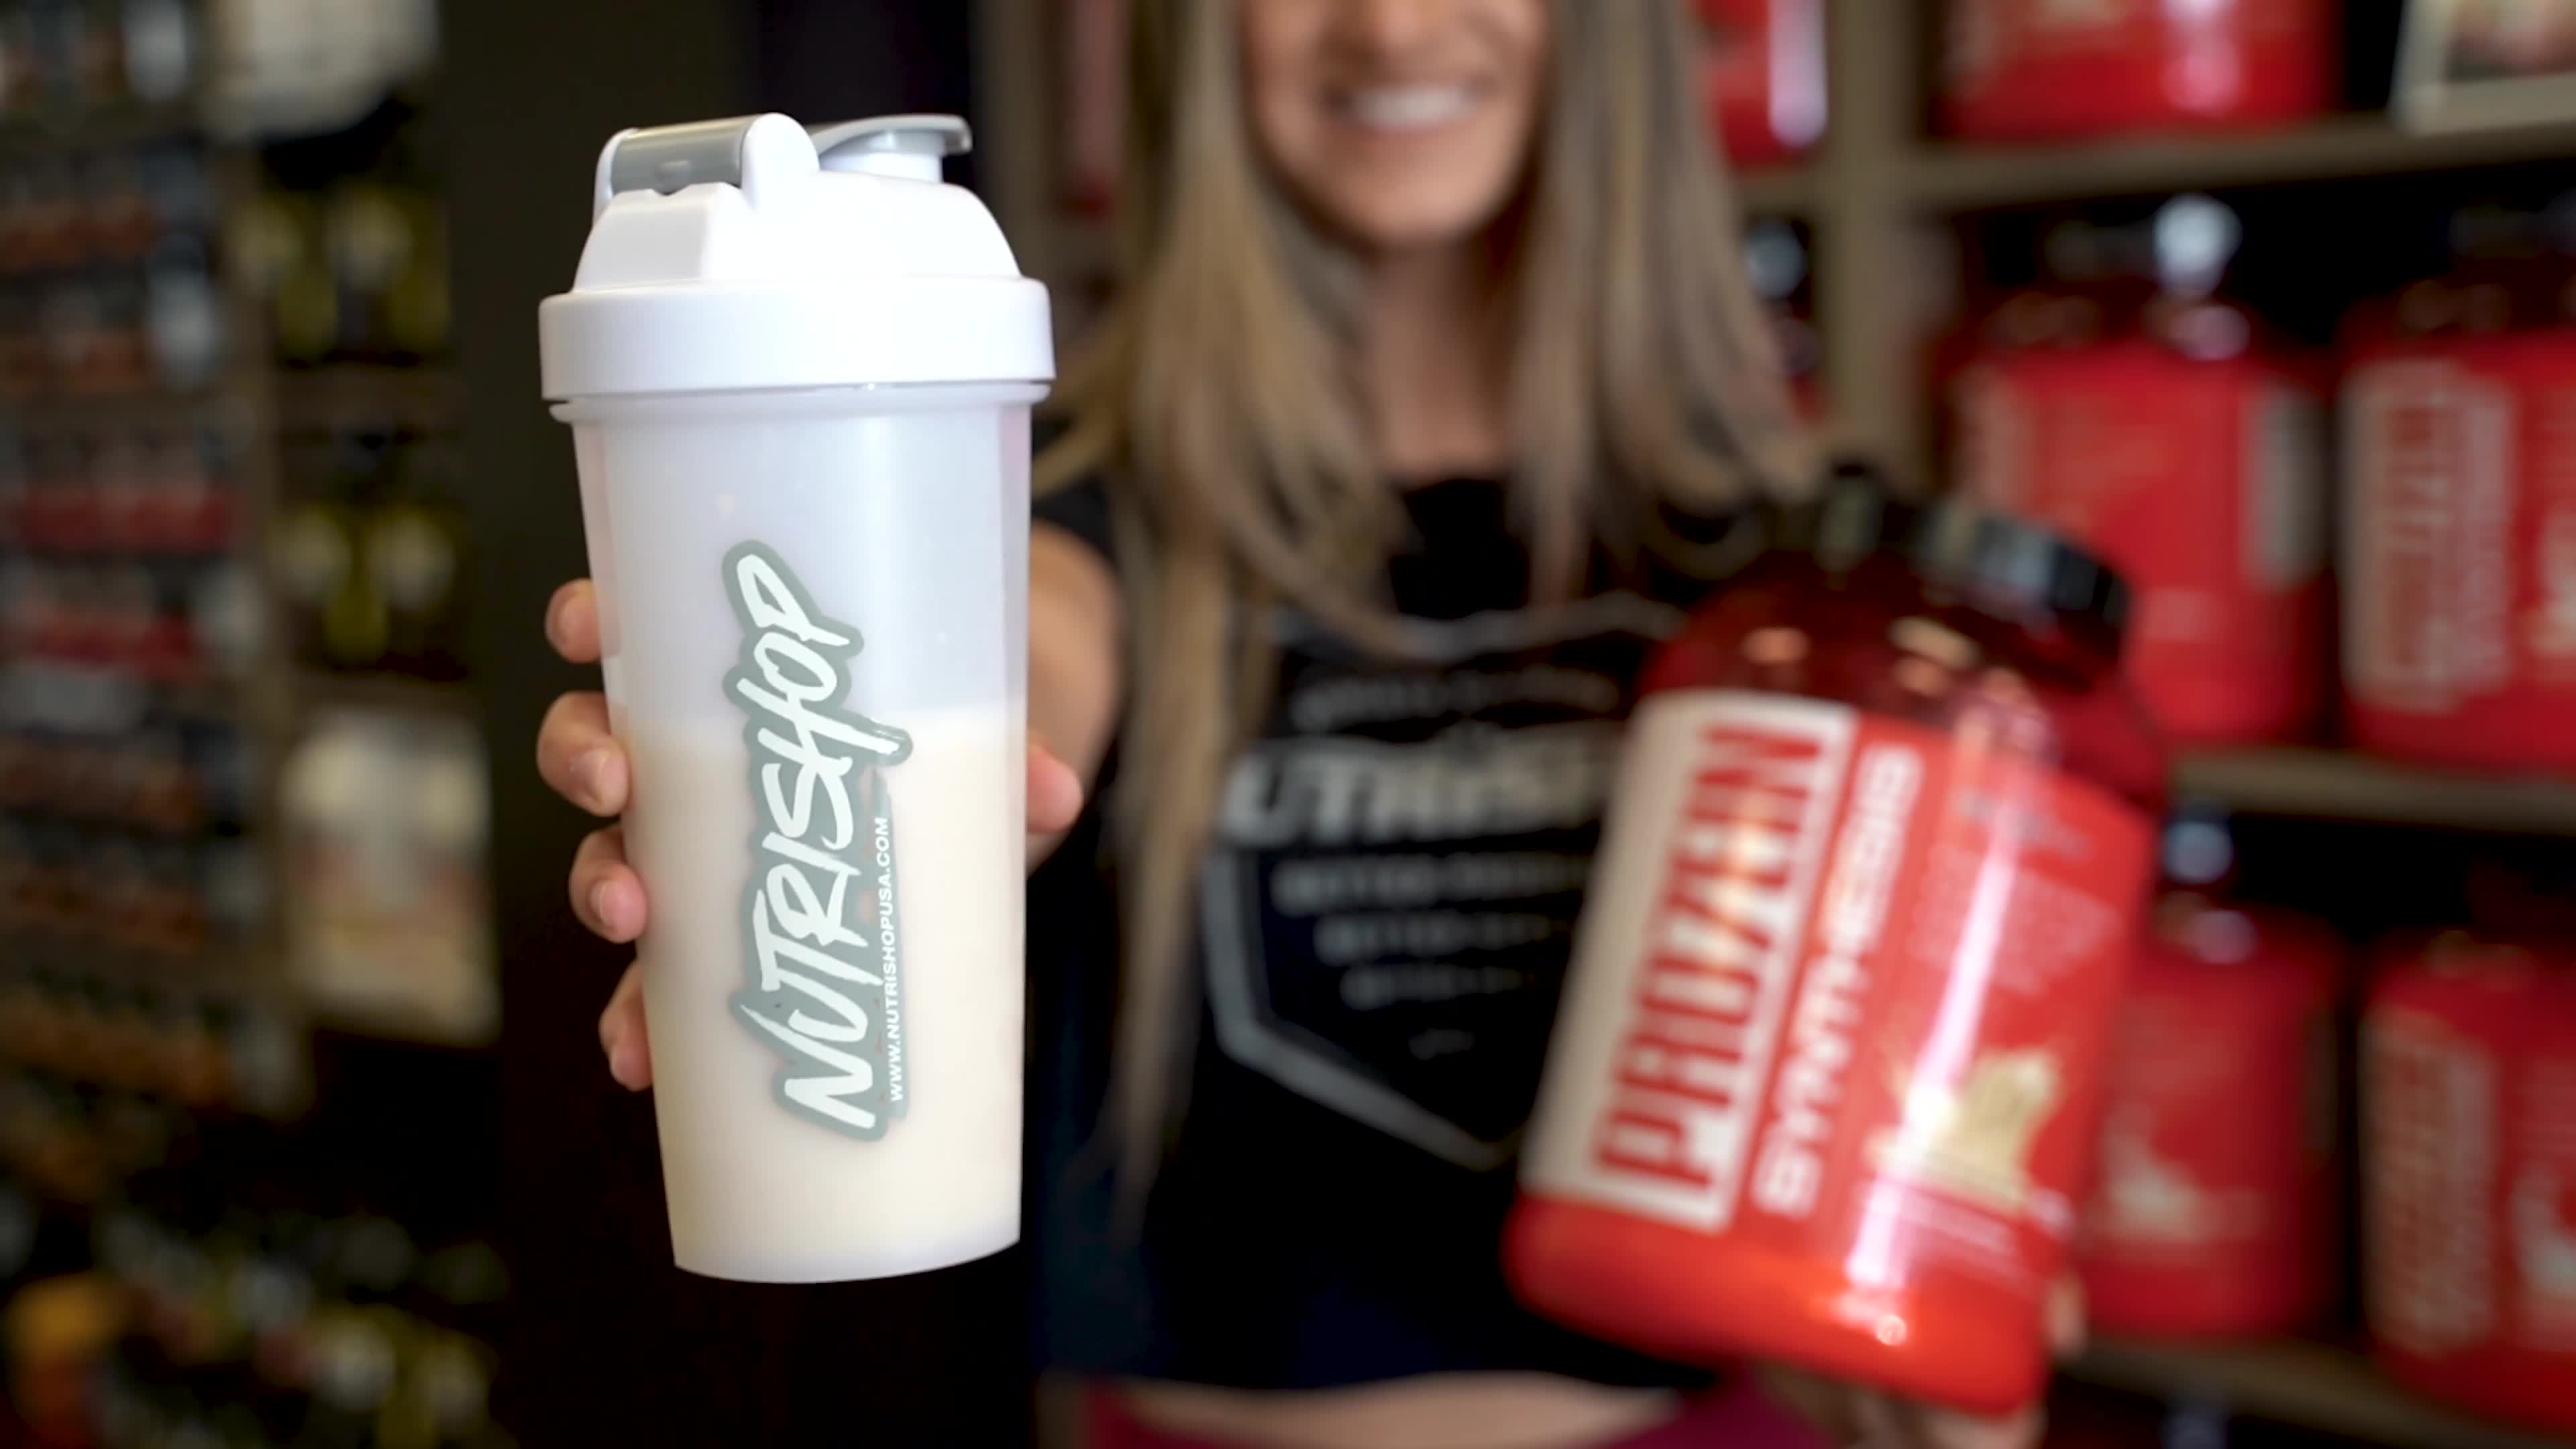 Clear Protein Shaker Cup – FINAFLEX